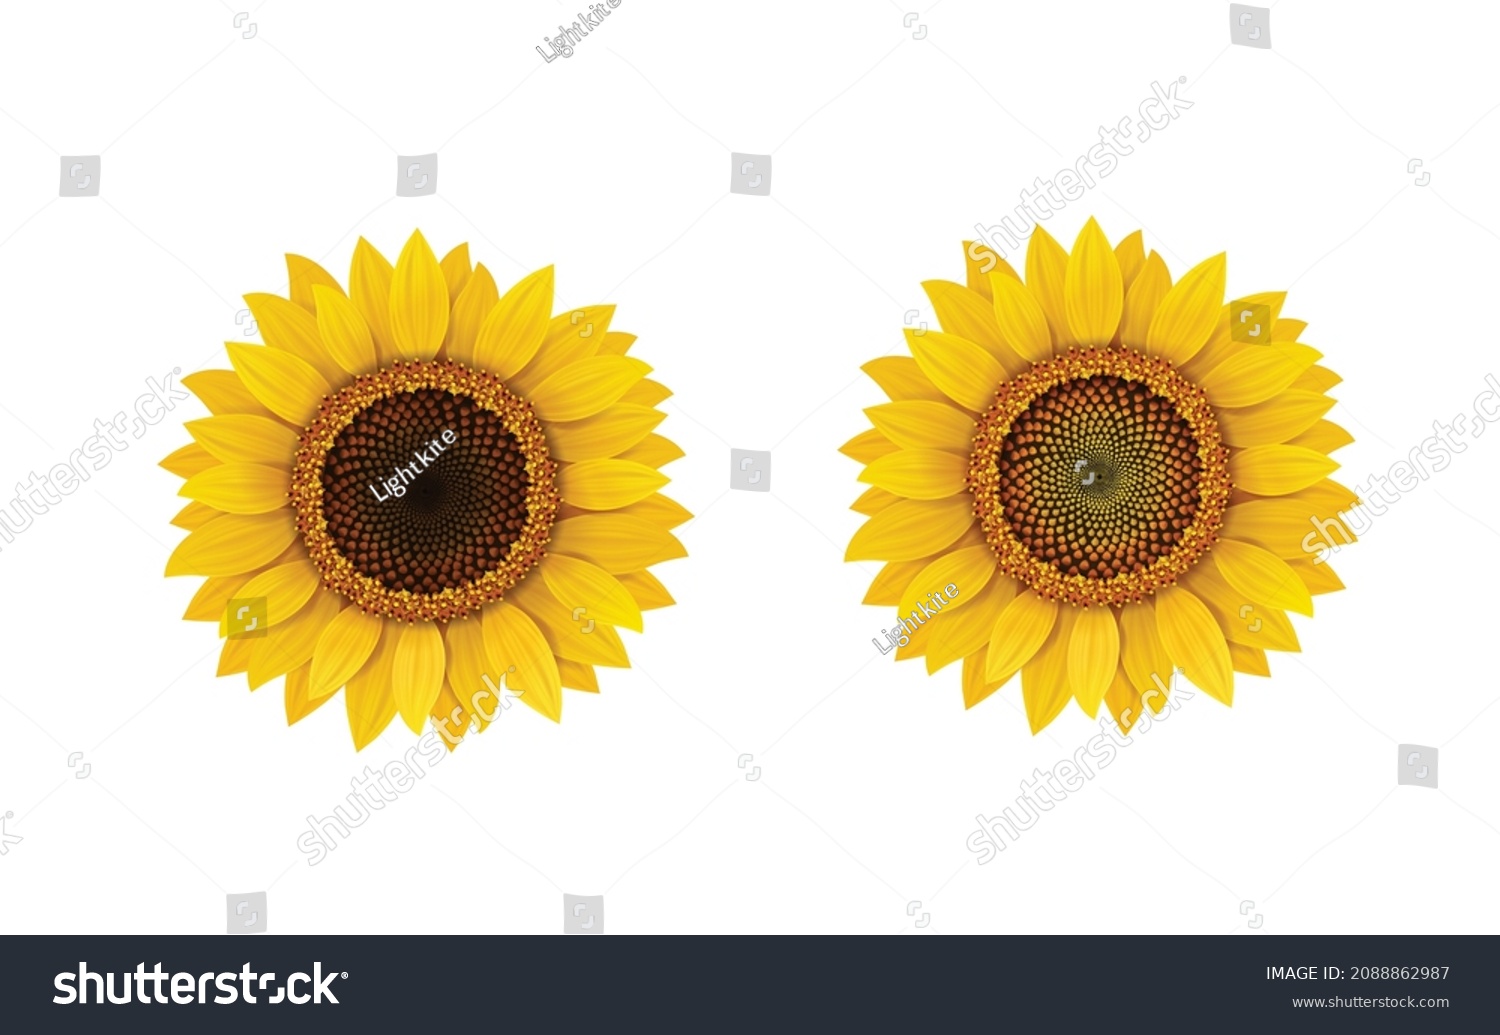 SVG of Sunflower  isolated, realistic flower in ripe and unripe sunflower seeds vector illustration. svg